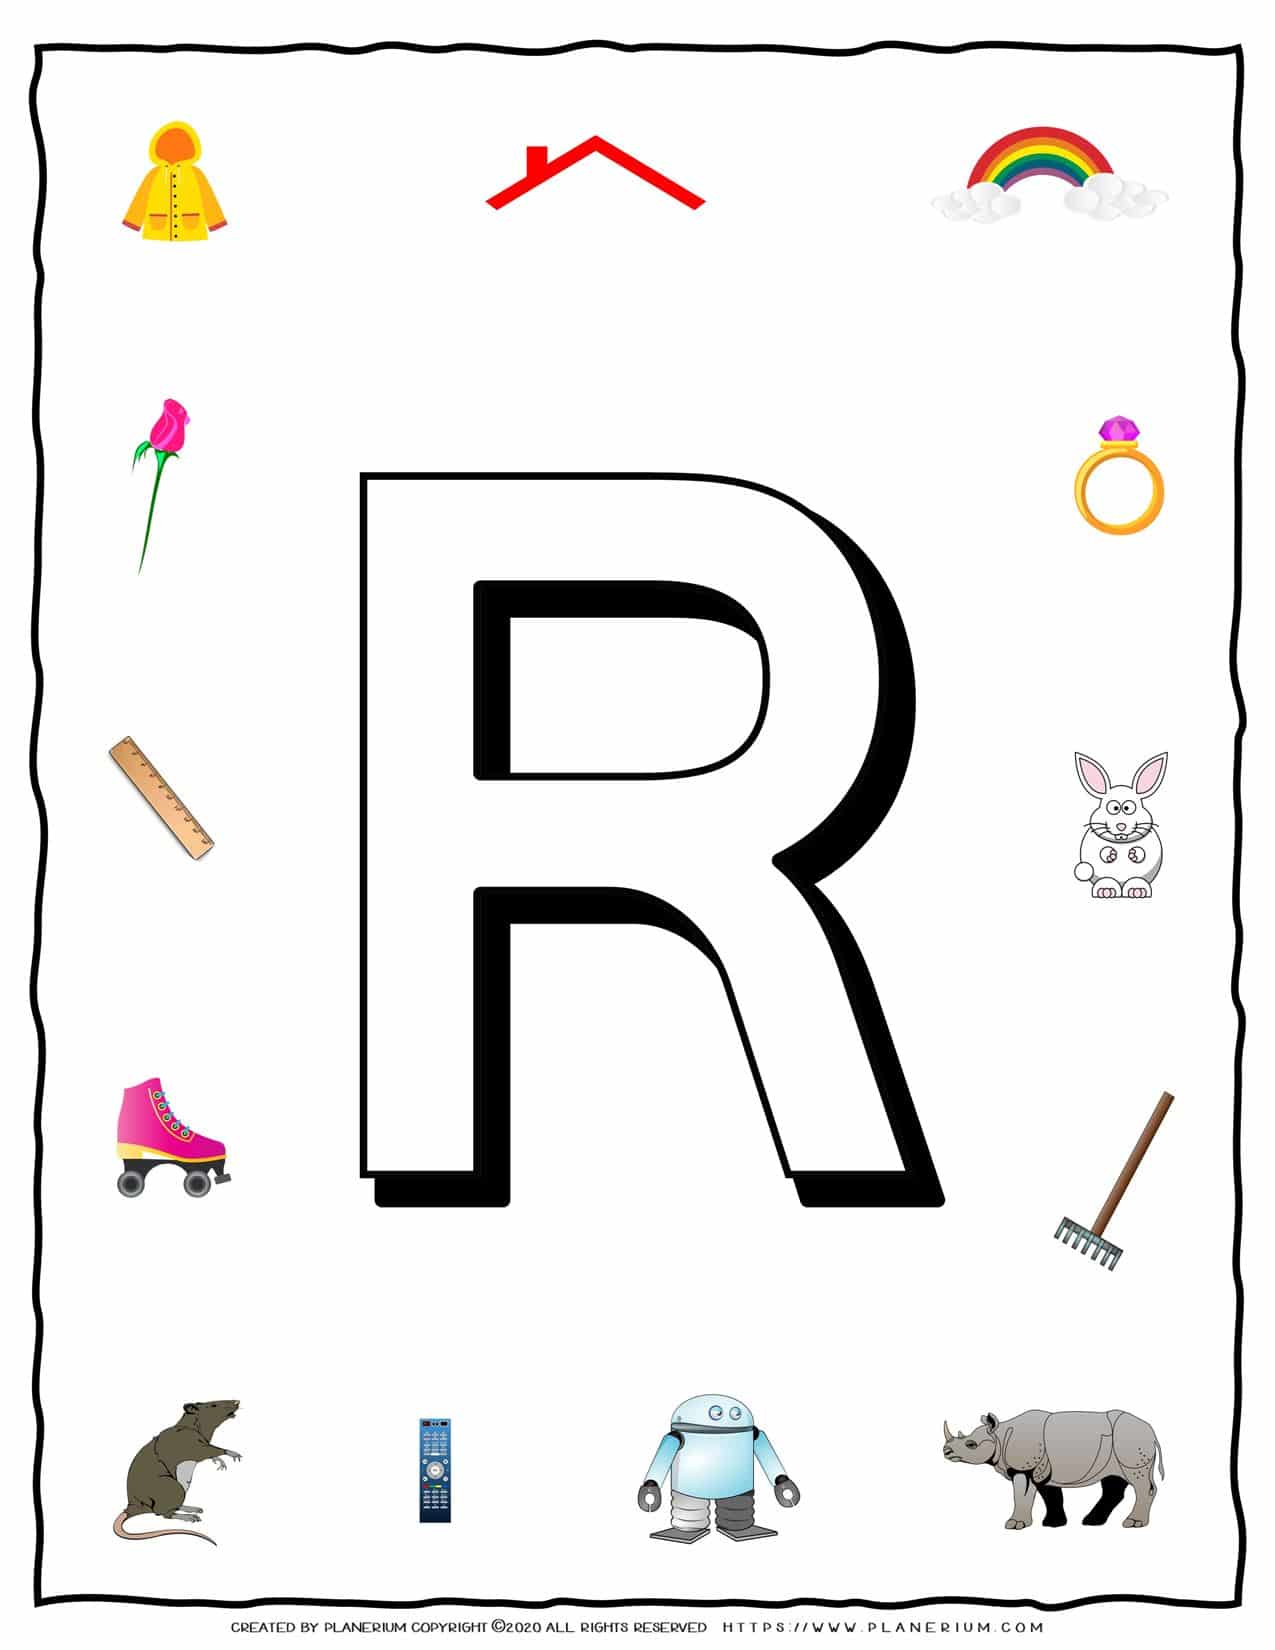 English Alphabet - Objects that starts with R | Planerium